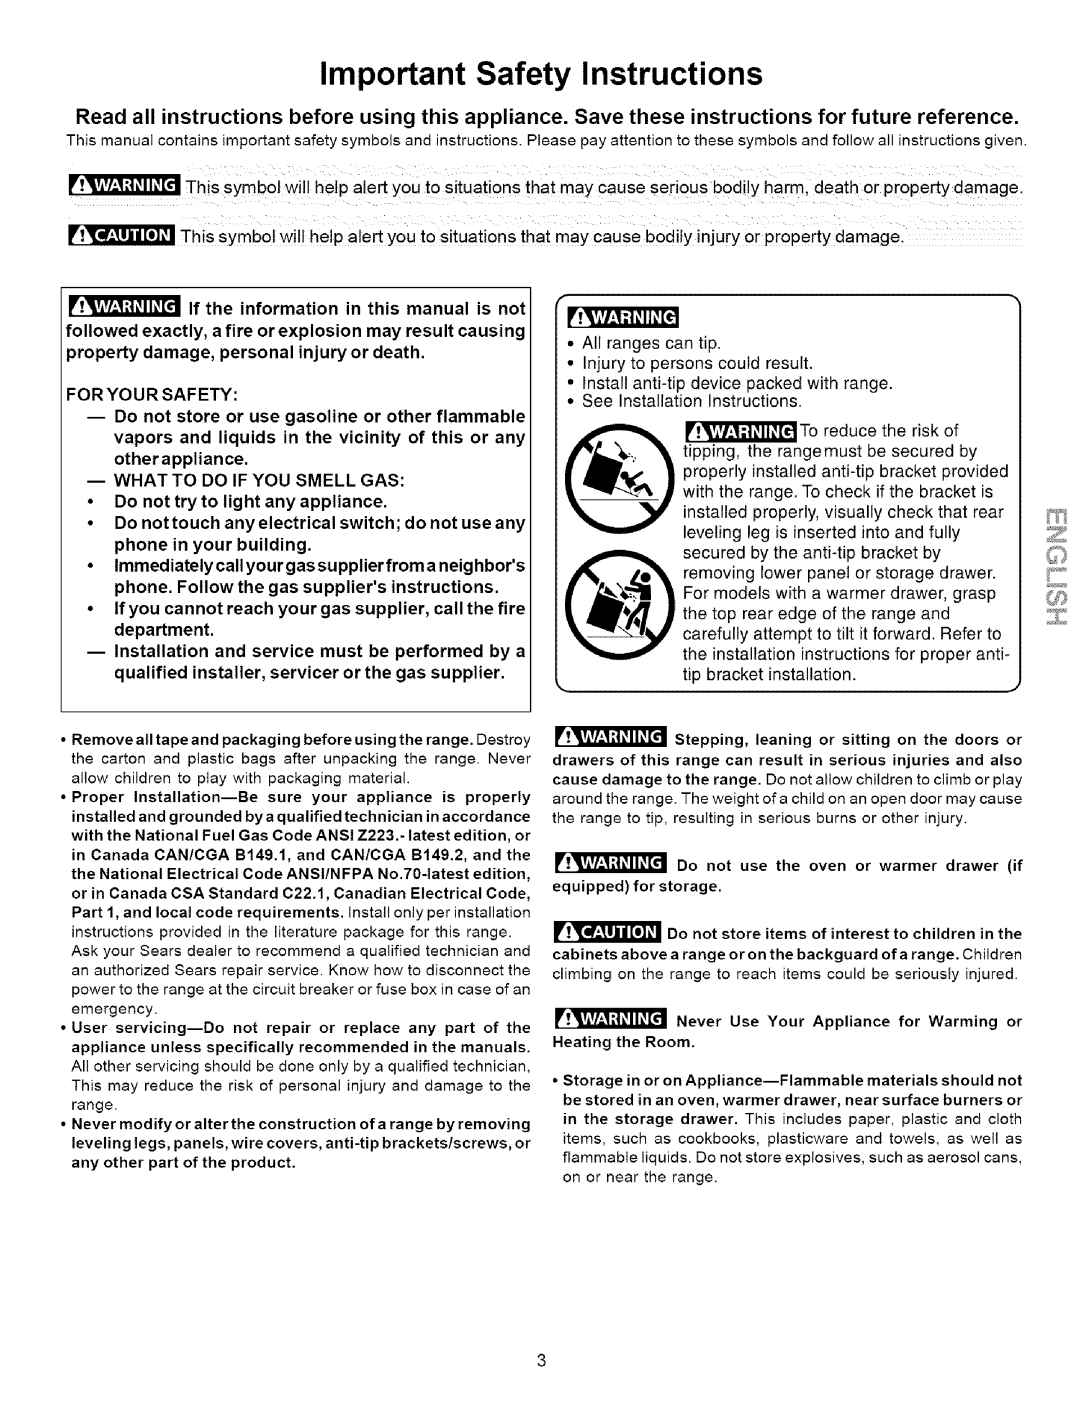 Kenmore 790.7867 Important Safety Instructions, If the information in this manual is not, What To Do If You Smell Gas 